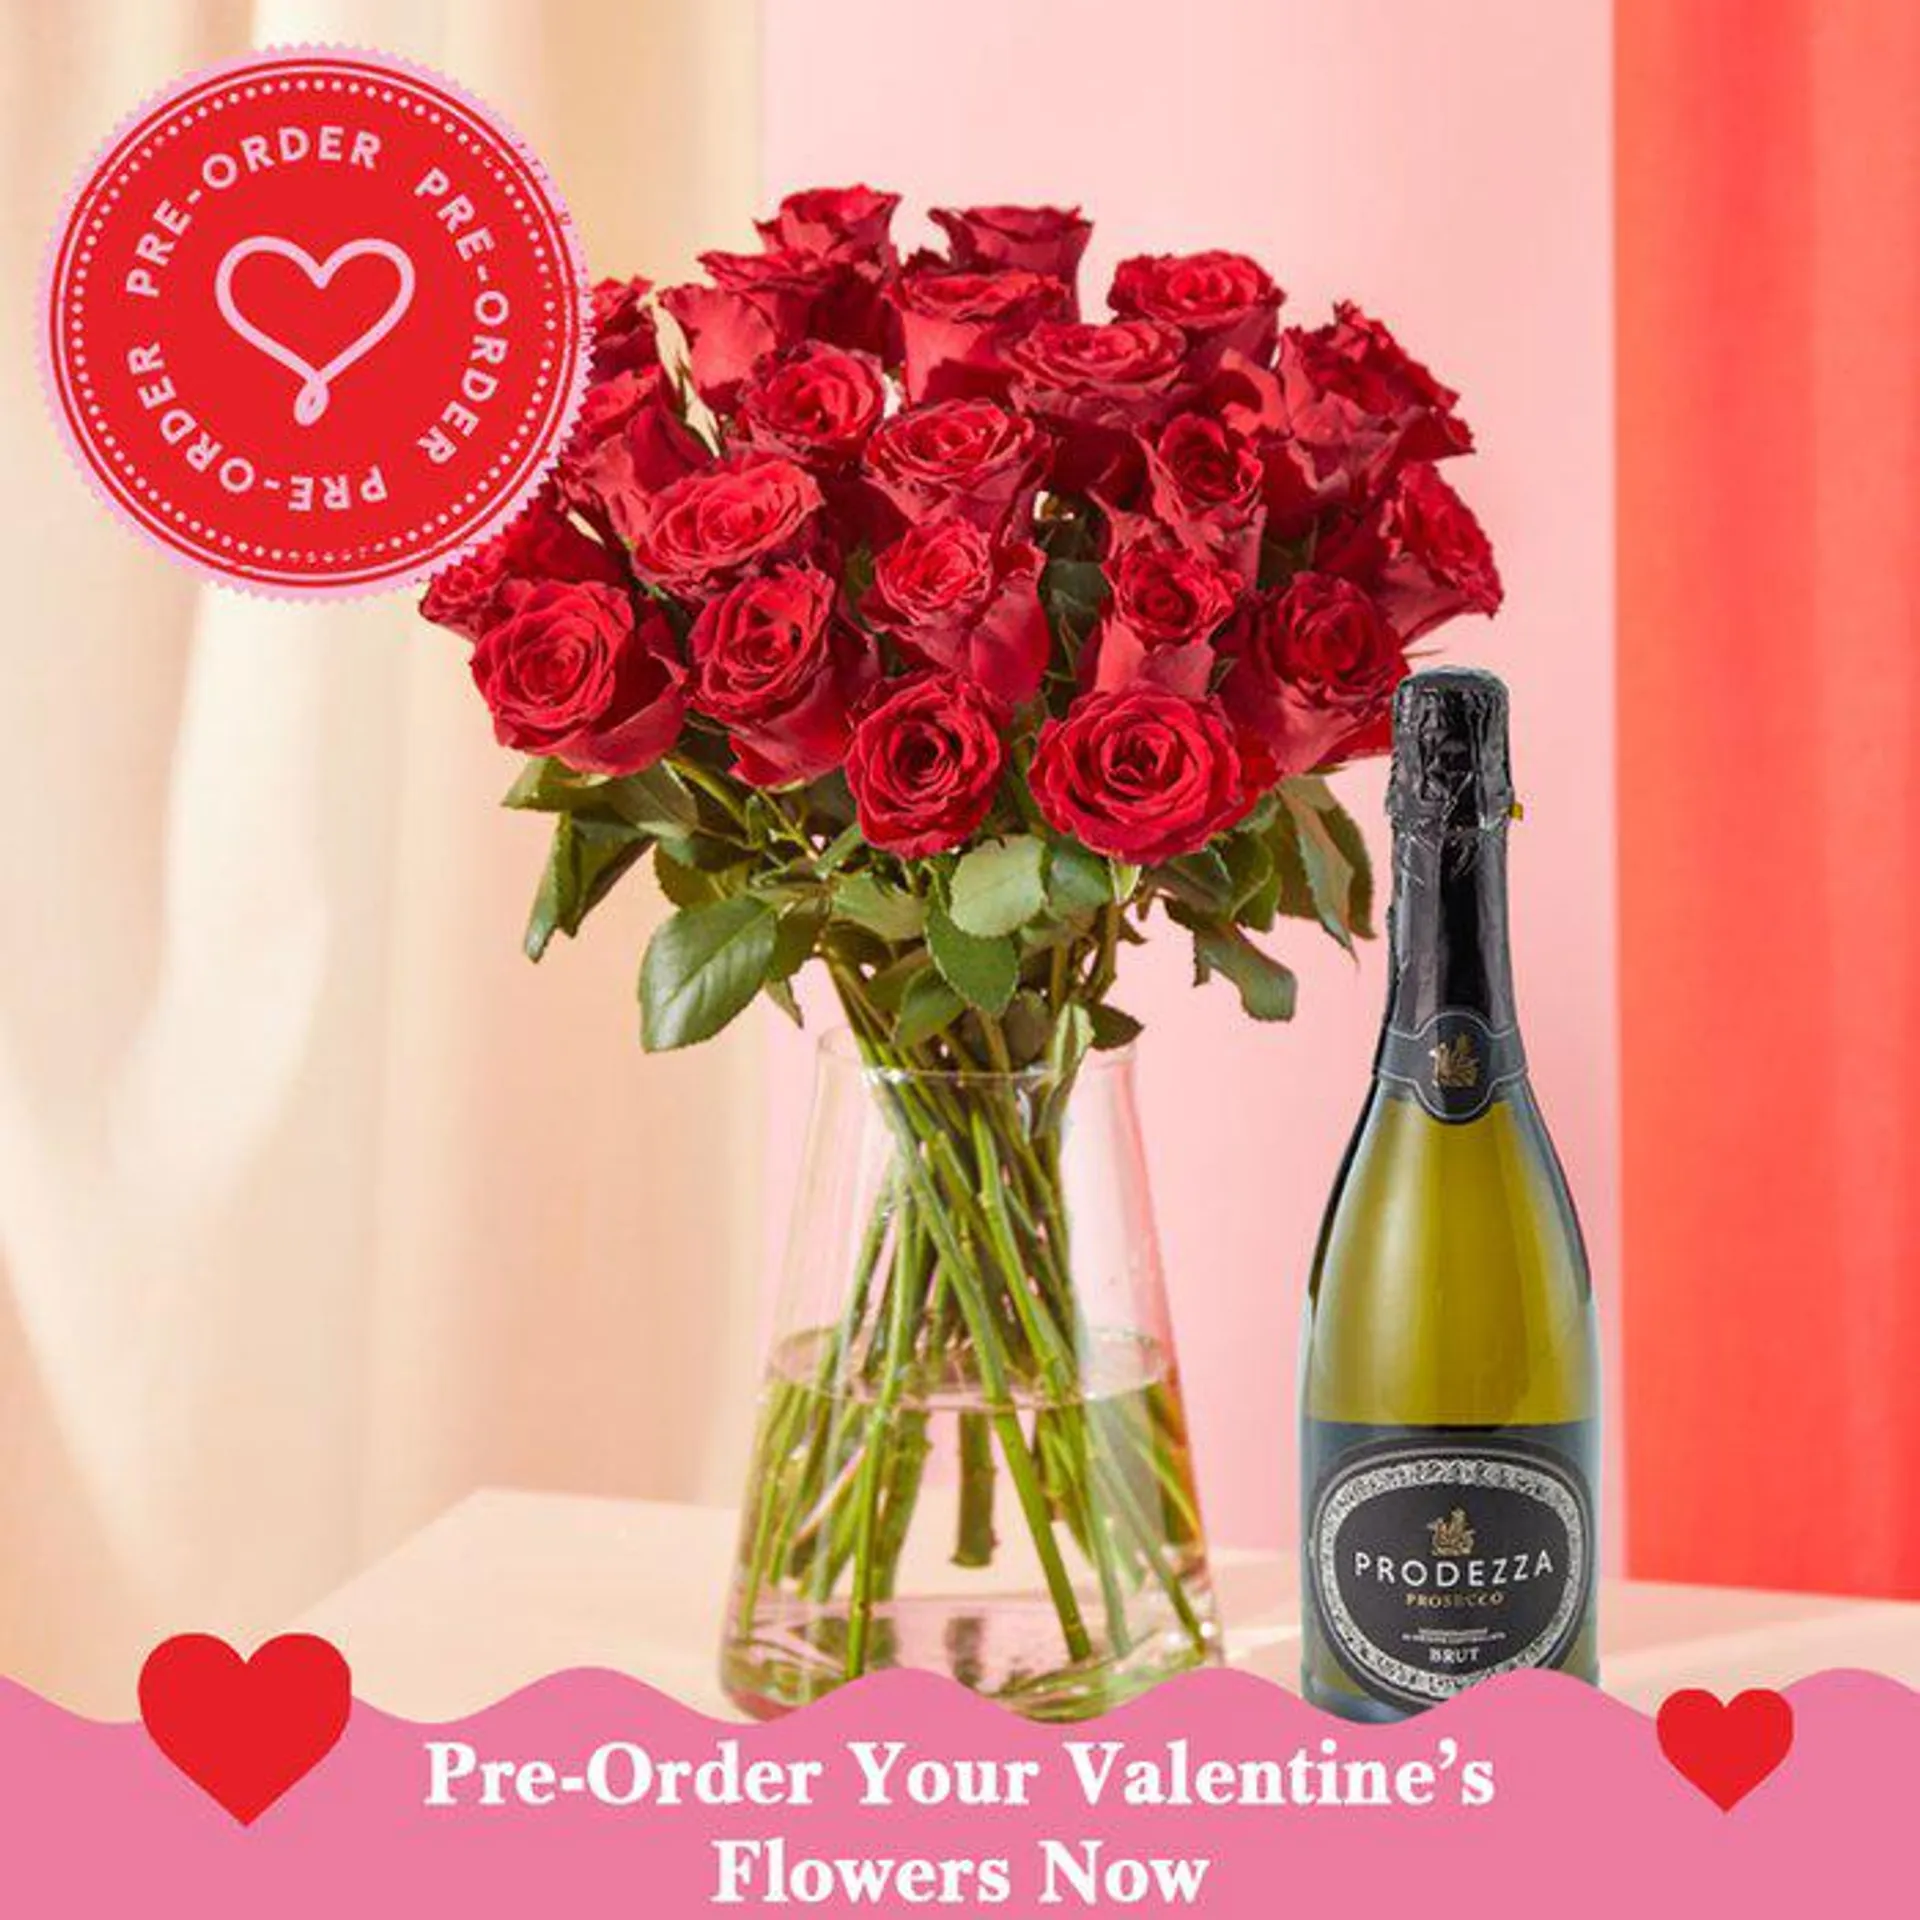 24 Red Roses and Senti Prosecco Gift Set